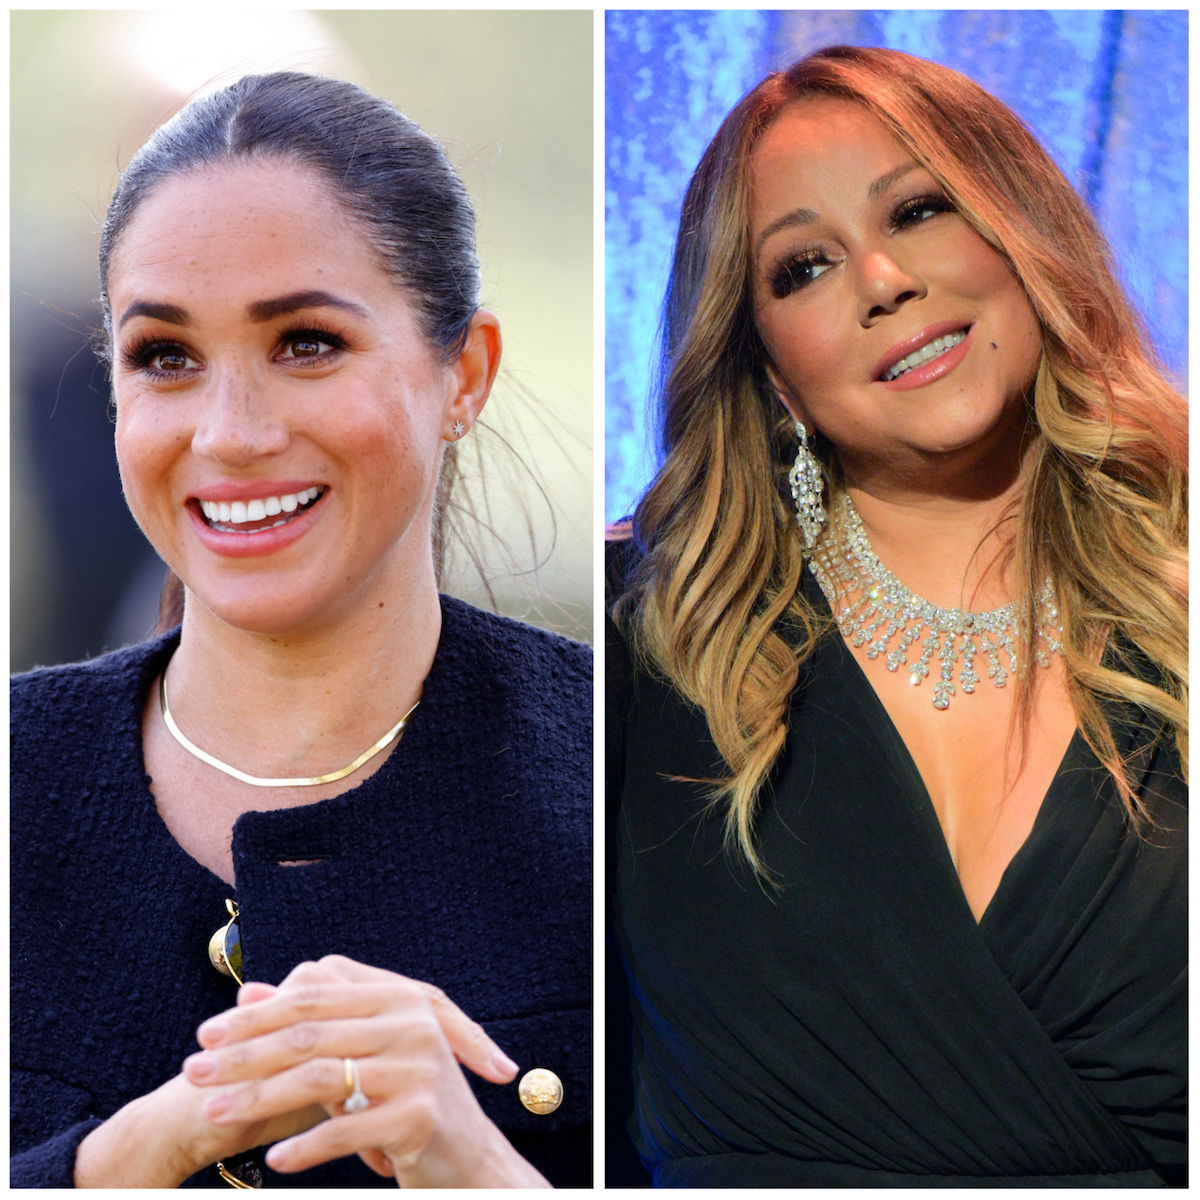 Meghan Markle, who had memorable moments in her 'Archetypes' podcast interview with Mariah Carey, looks on; Mariah Carey looks on wearing a black dress